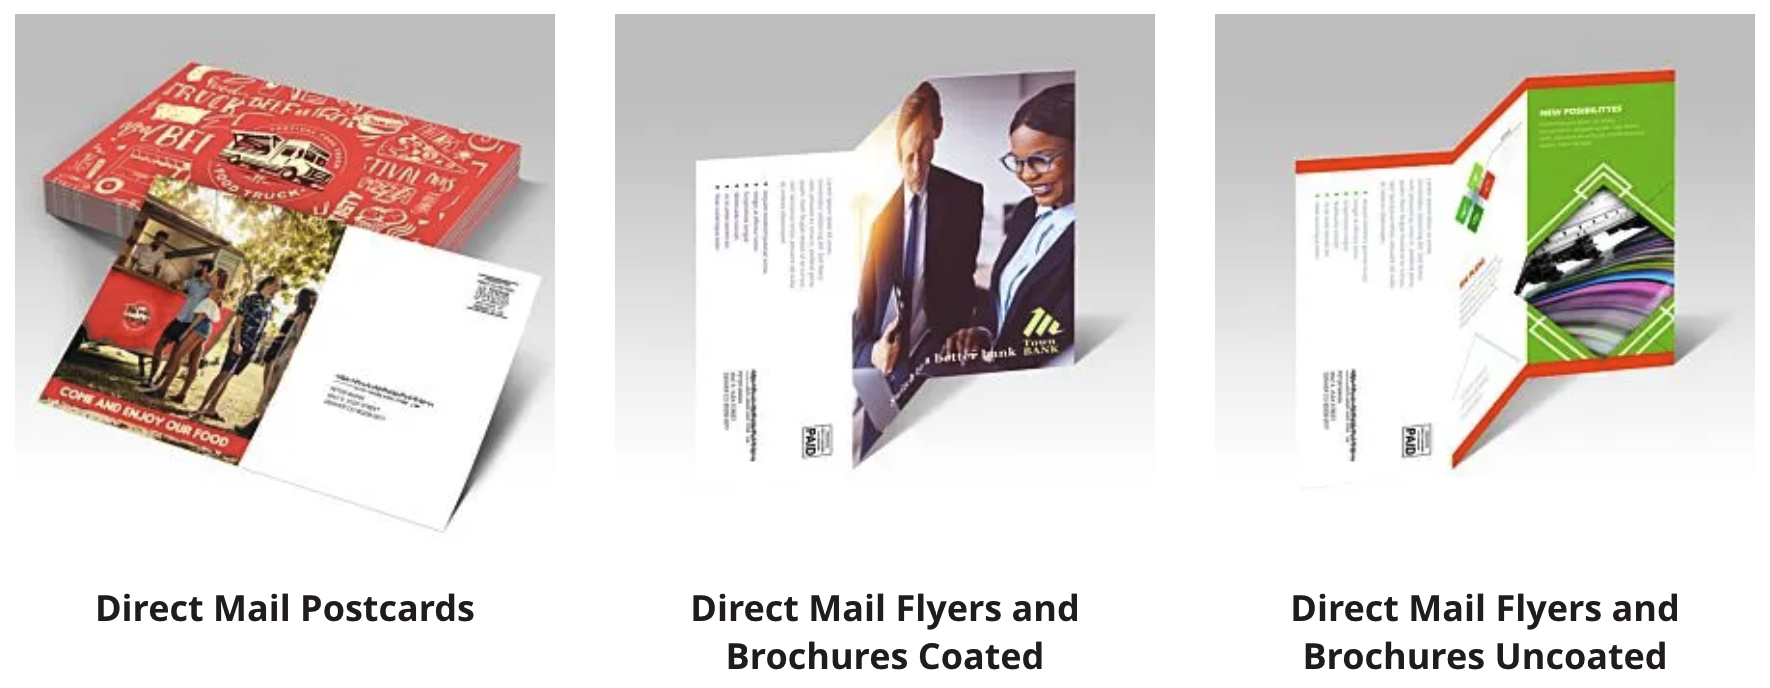 Direct Mail Products